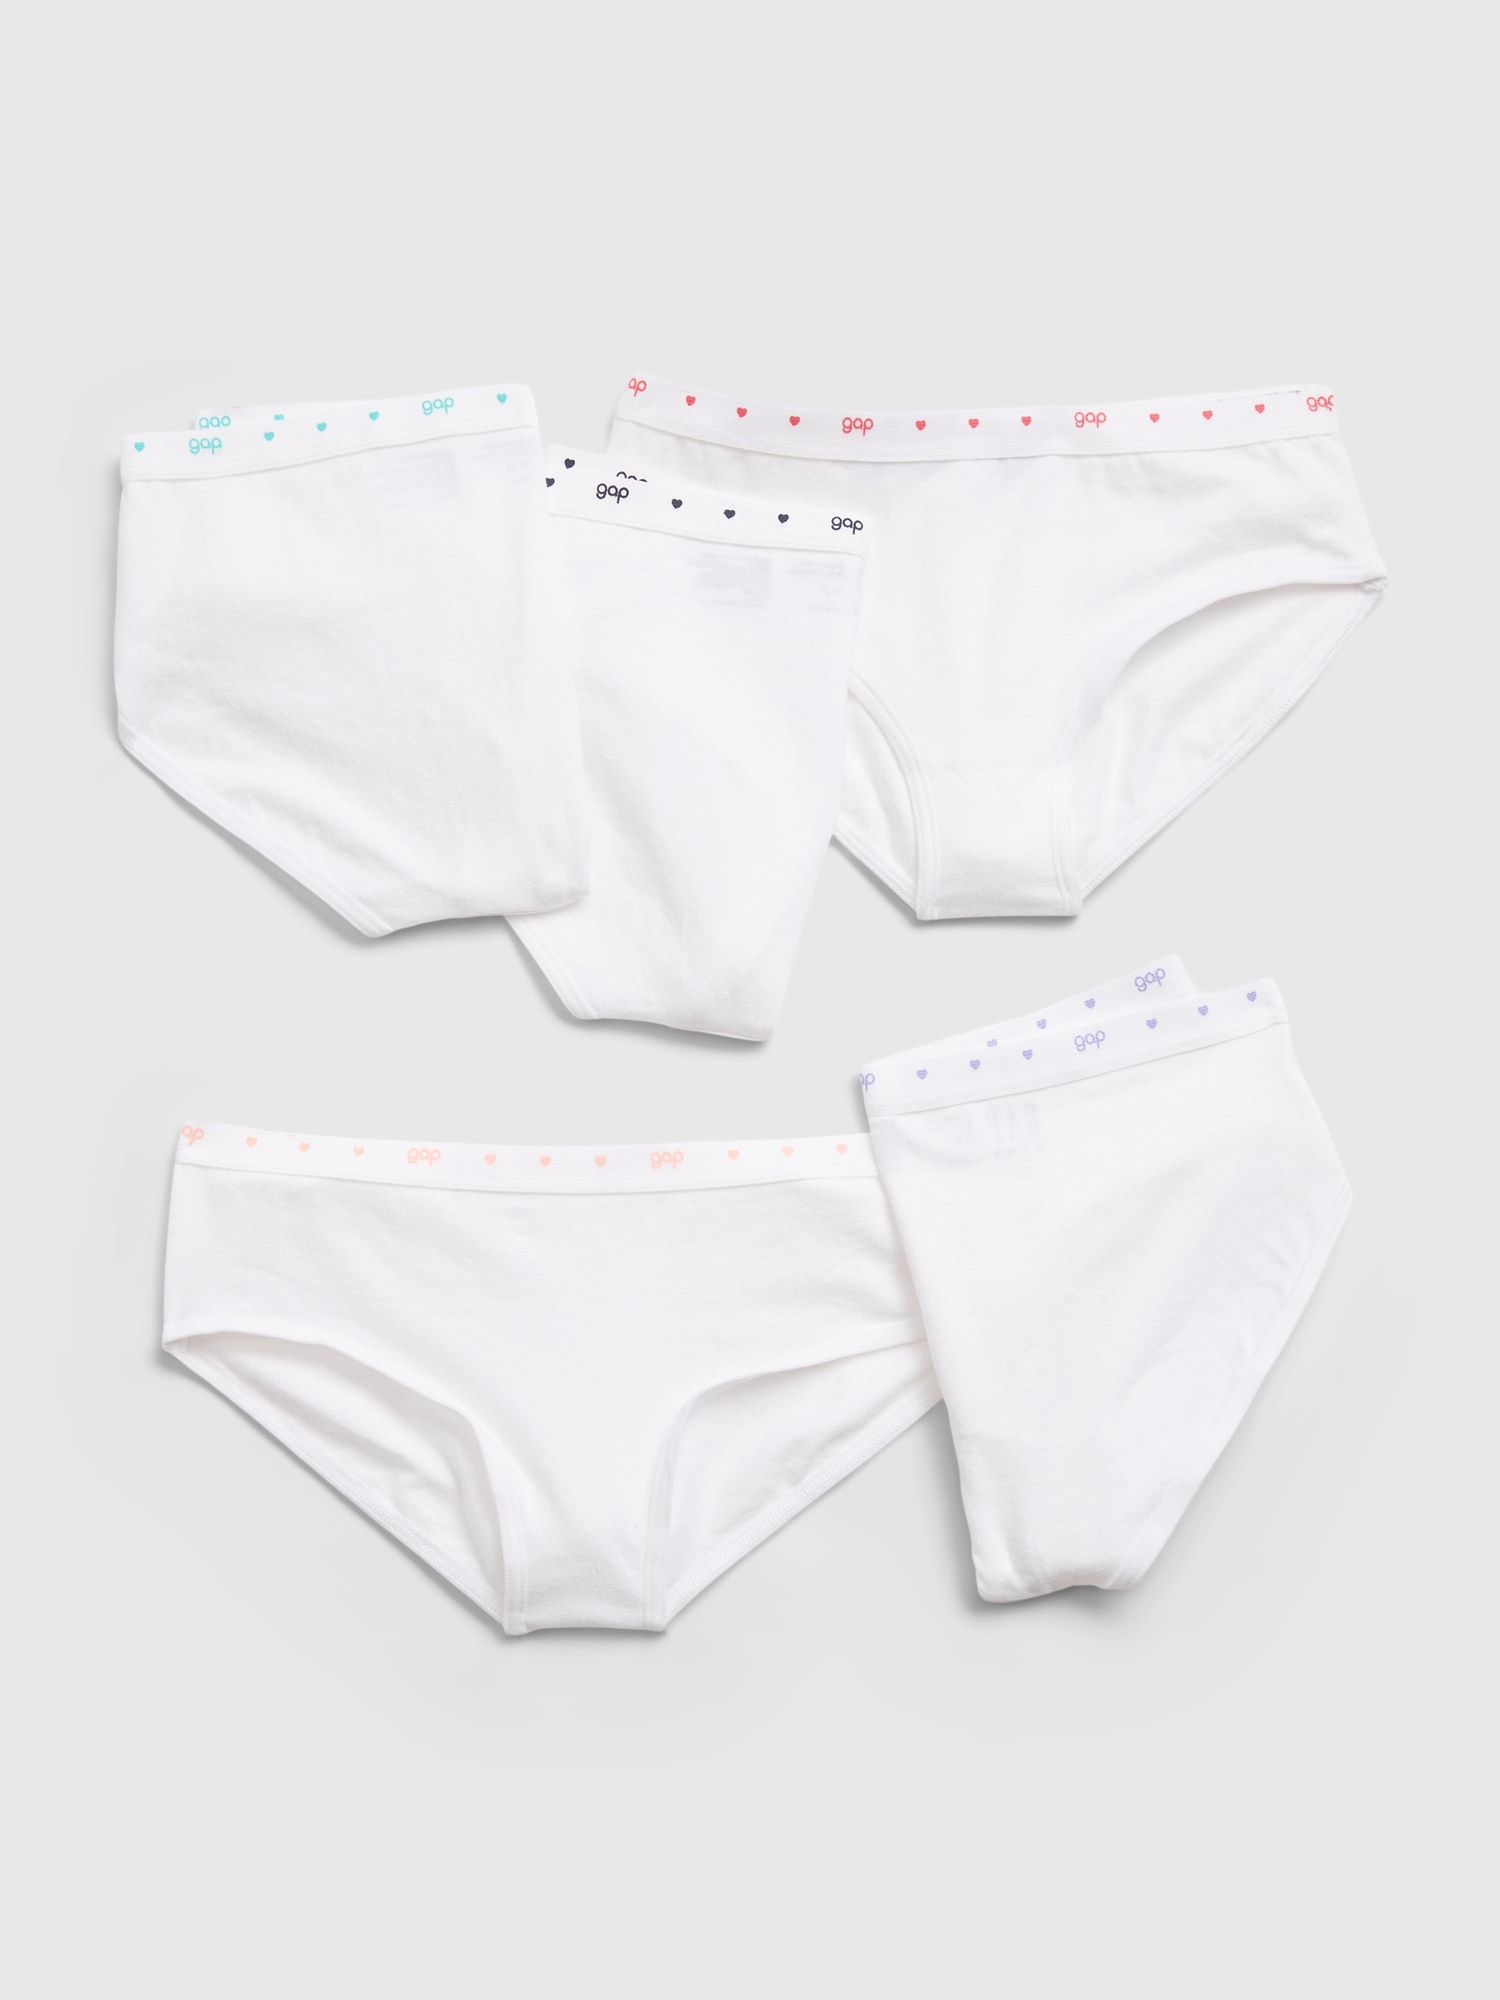 5 Pack Cotton Incontinence Briefs For Women For Teenage Girls, Ages 2 14  High Quality Underwear For Kids From Ylwdome, $17.33